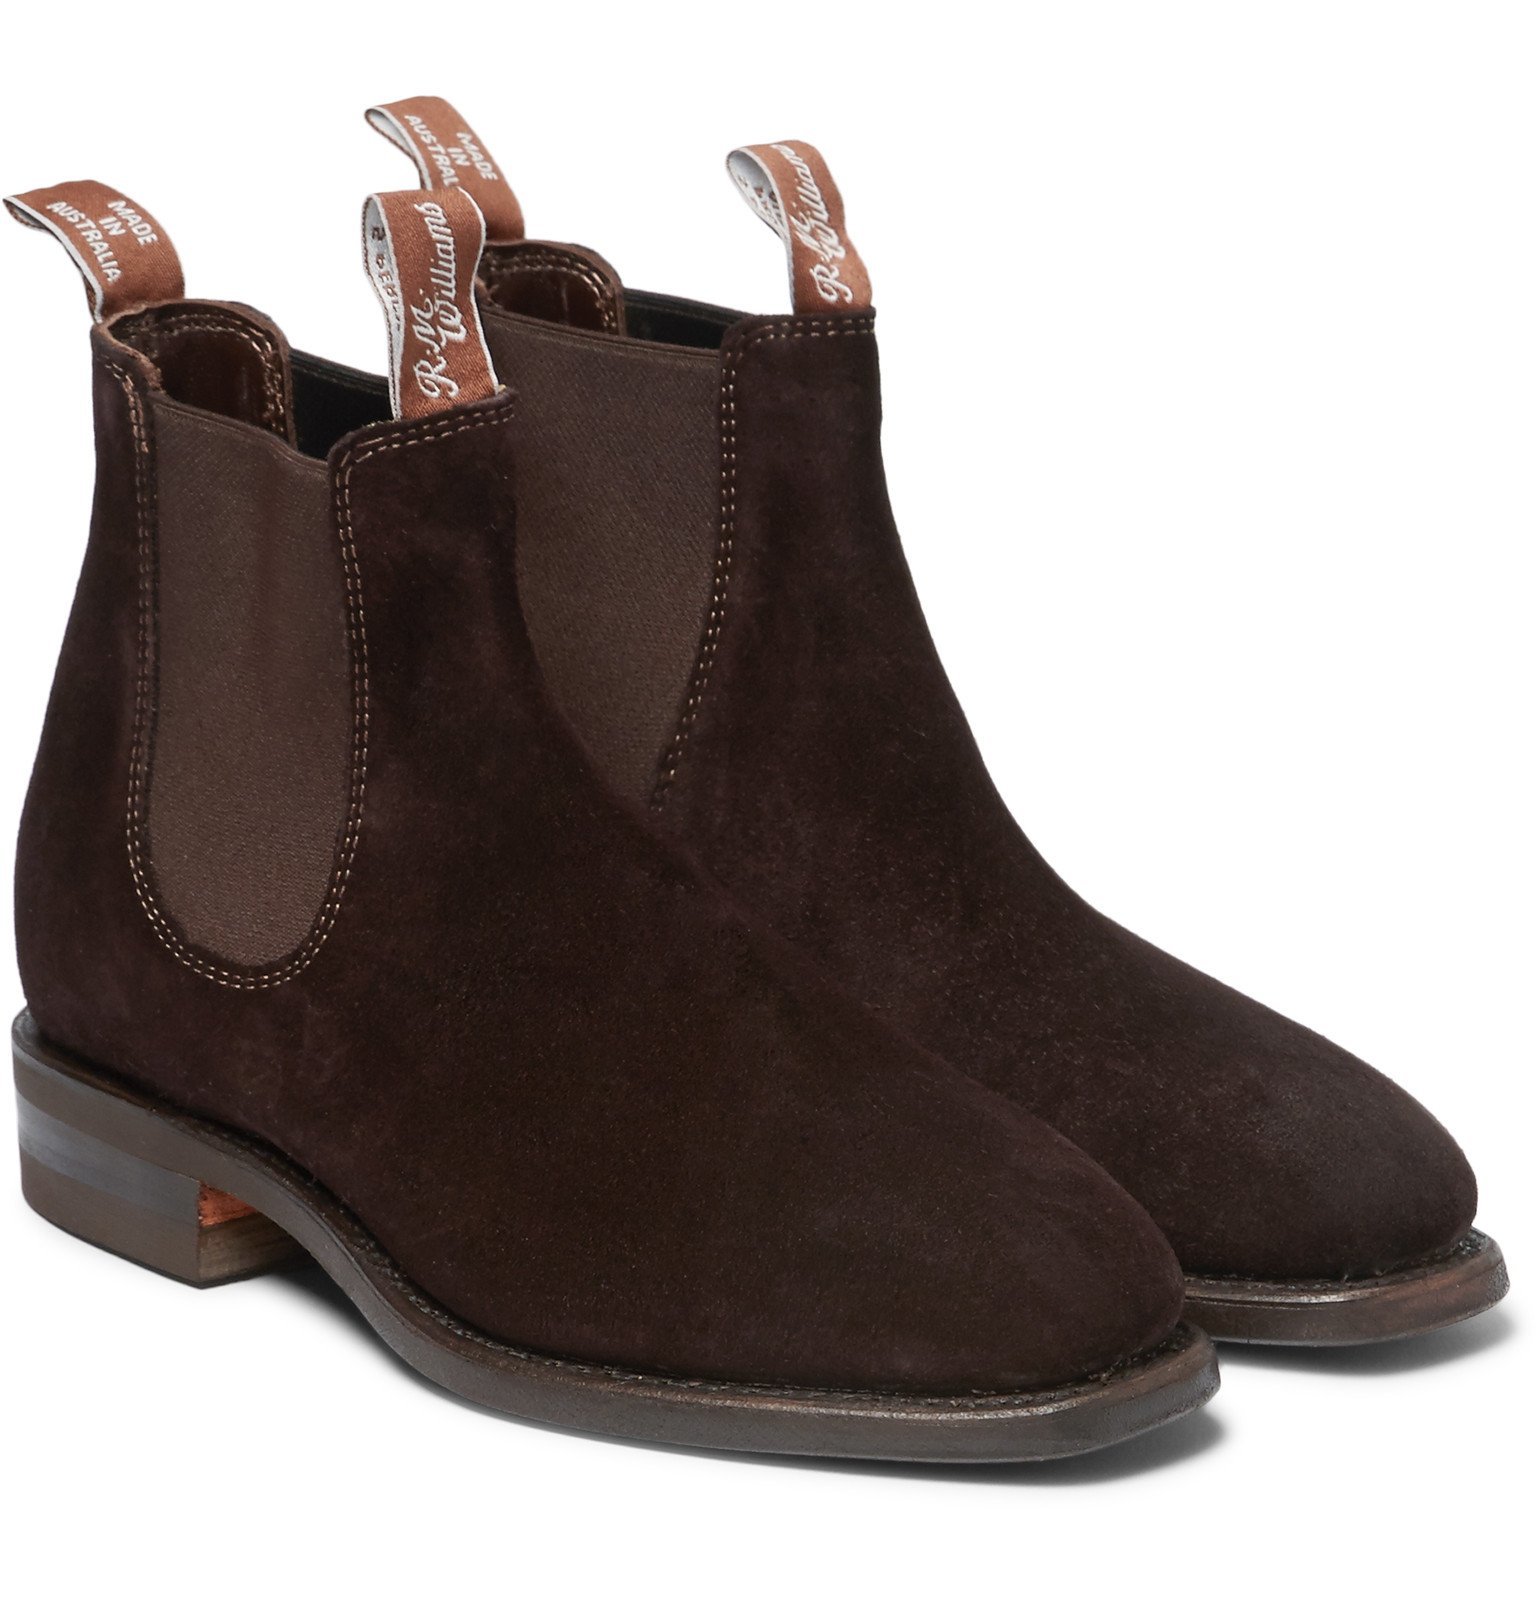 rm williams suede chelsea boots